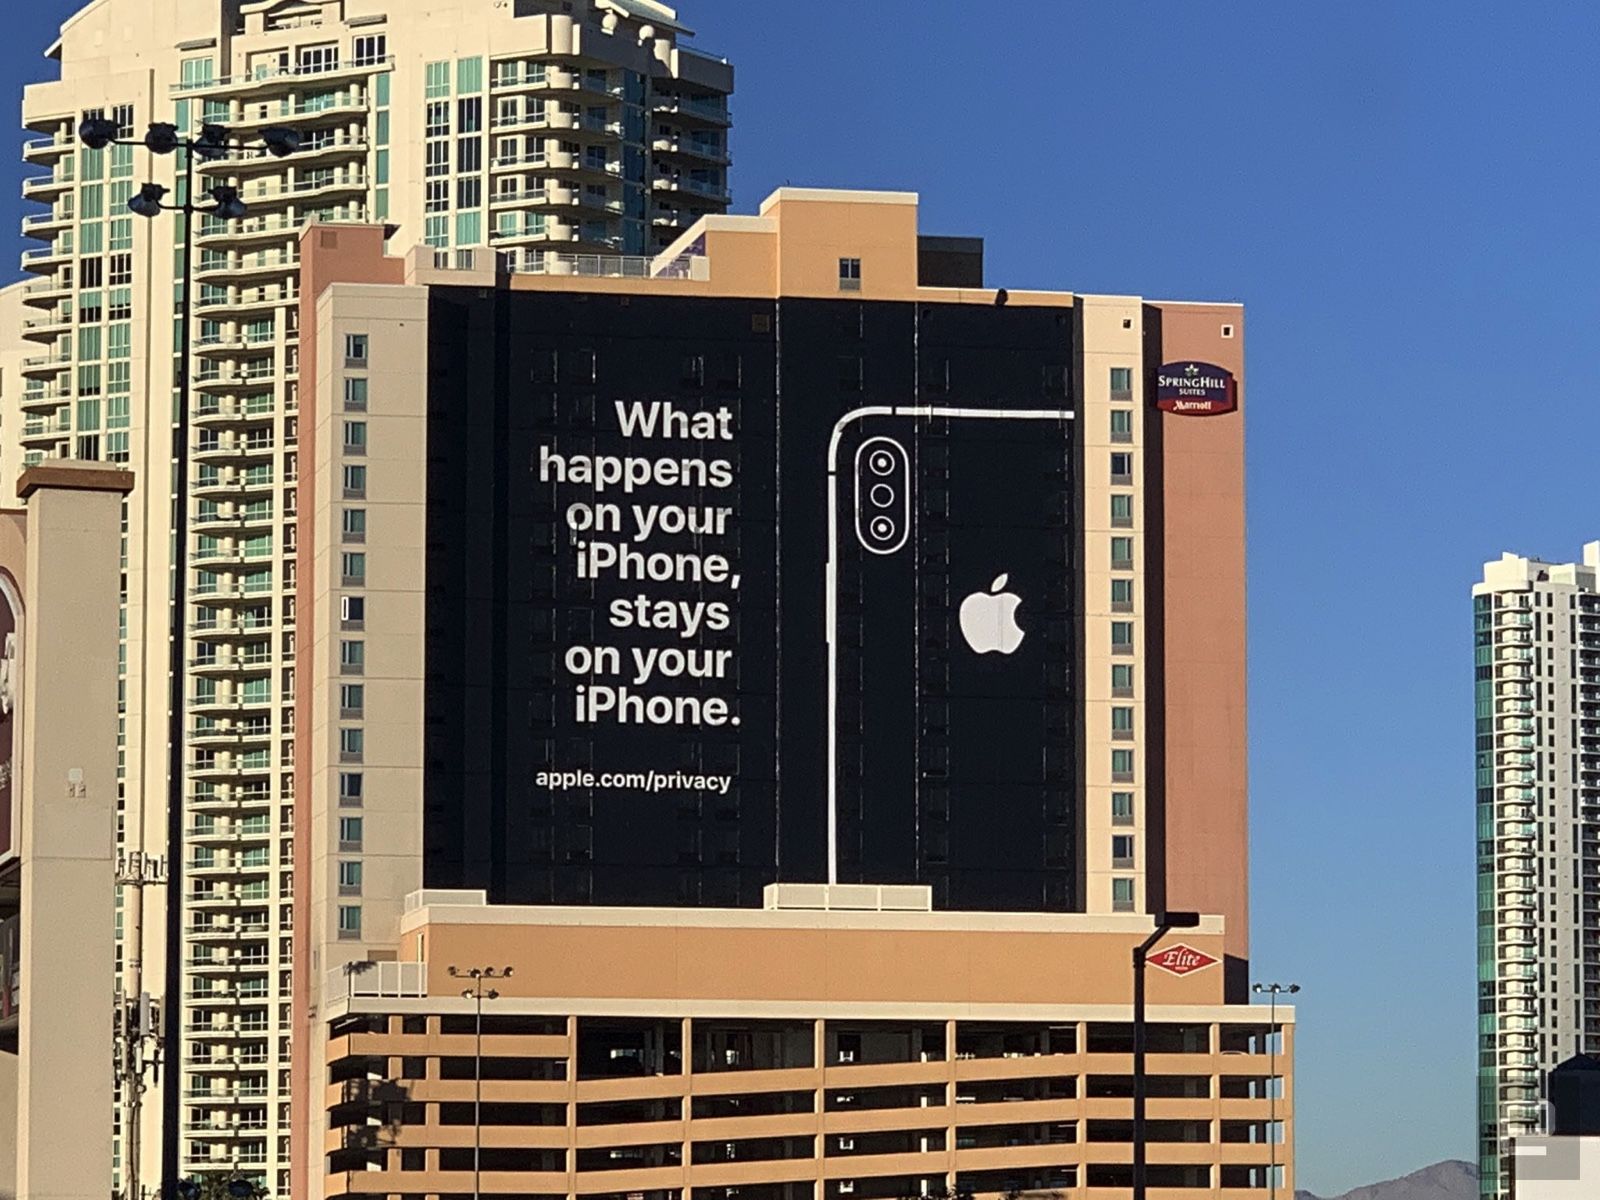 Apple ad on side of building during CES 2019. Reads: ‘What happens on your iPhone, stays on your iPhone.’